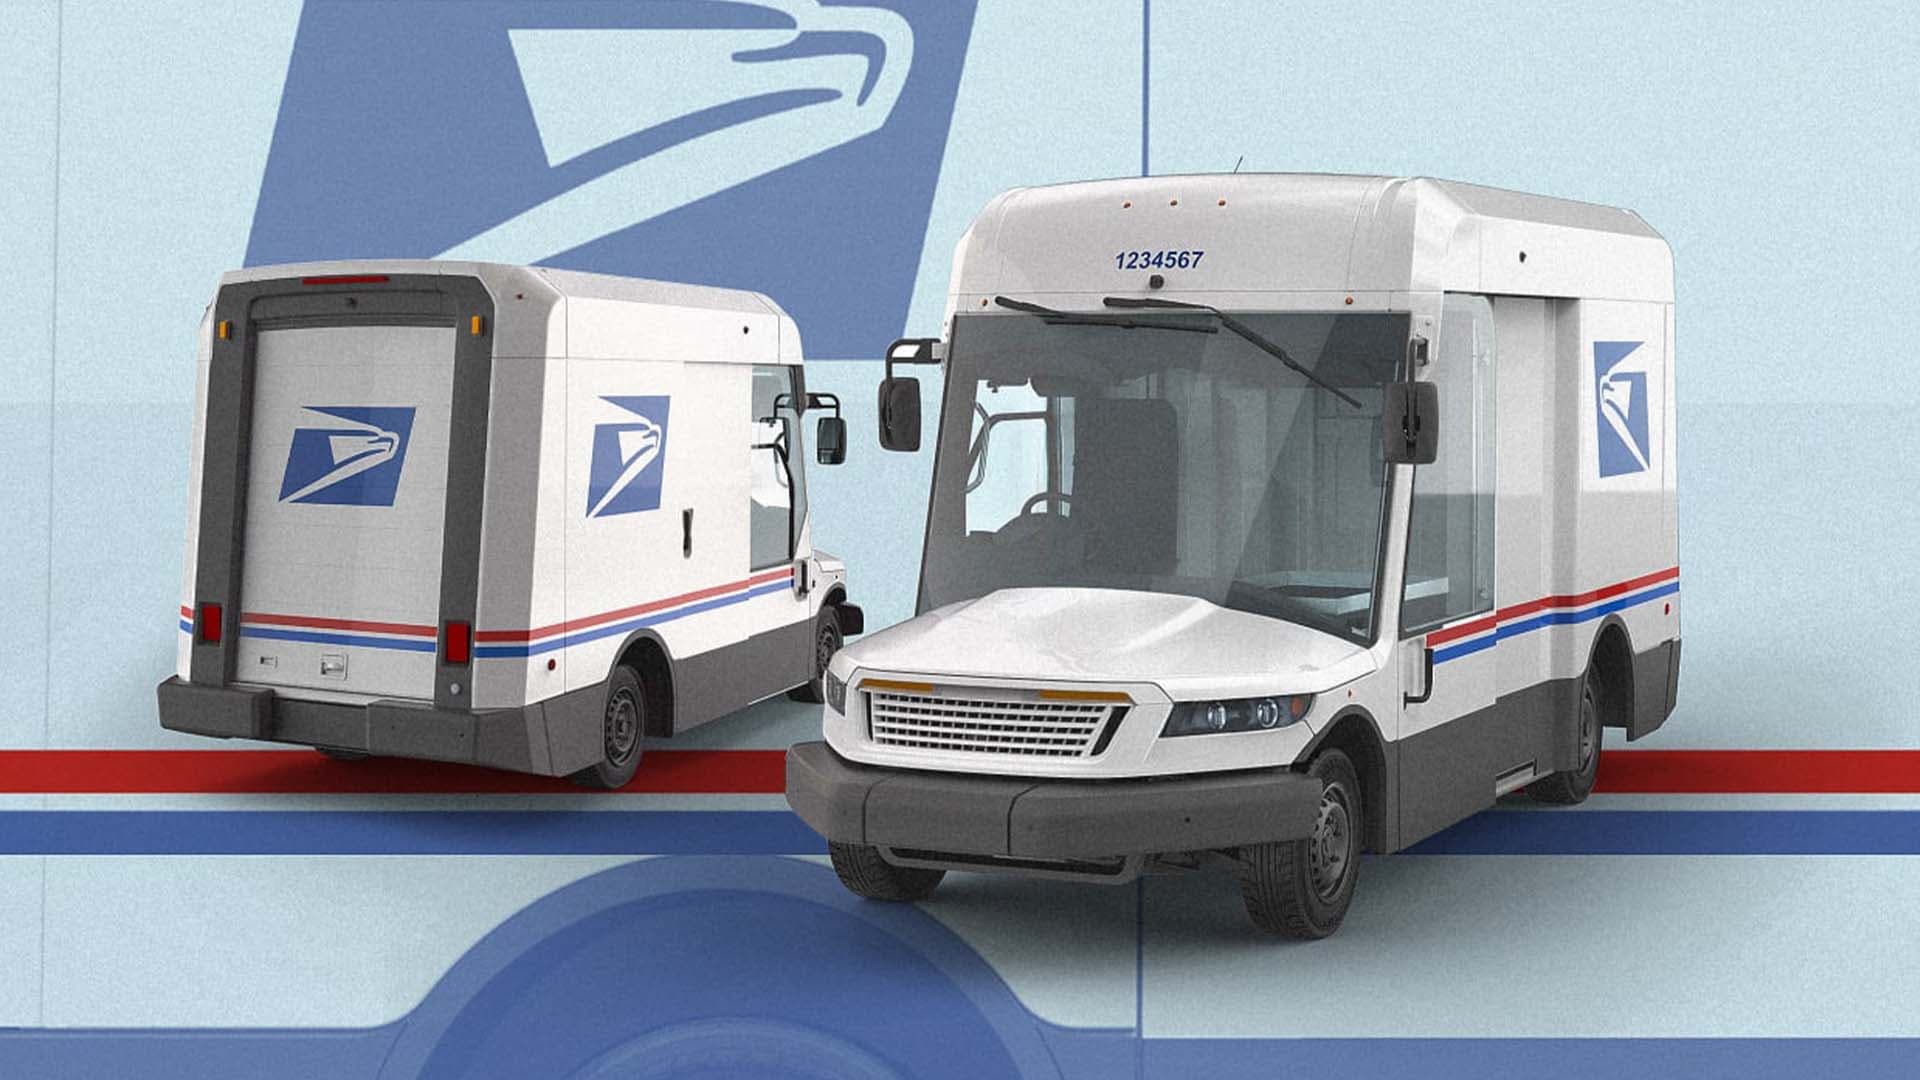 New USPS Truck Might Be in Trouble After Biden Admin Criticizes Lack of EV Option